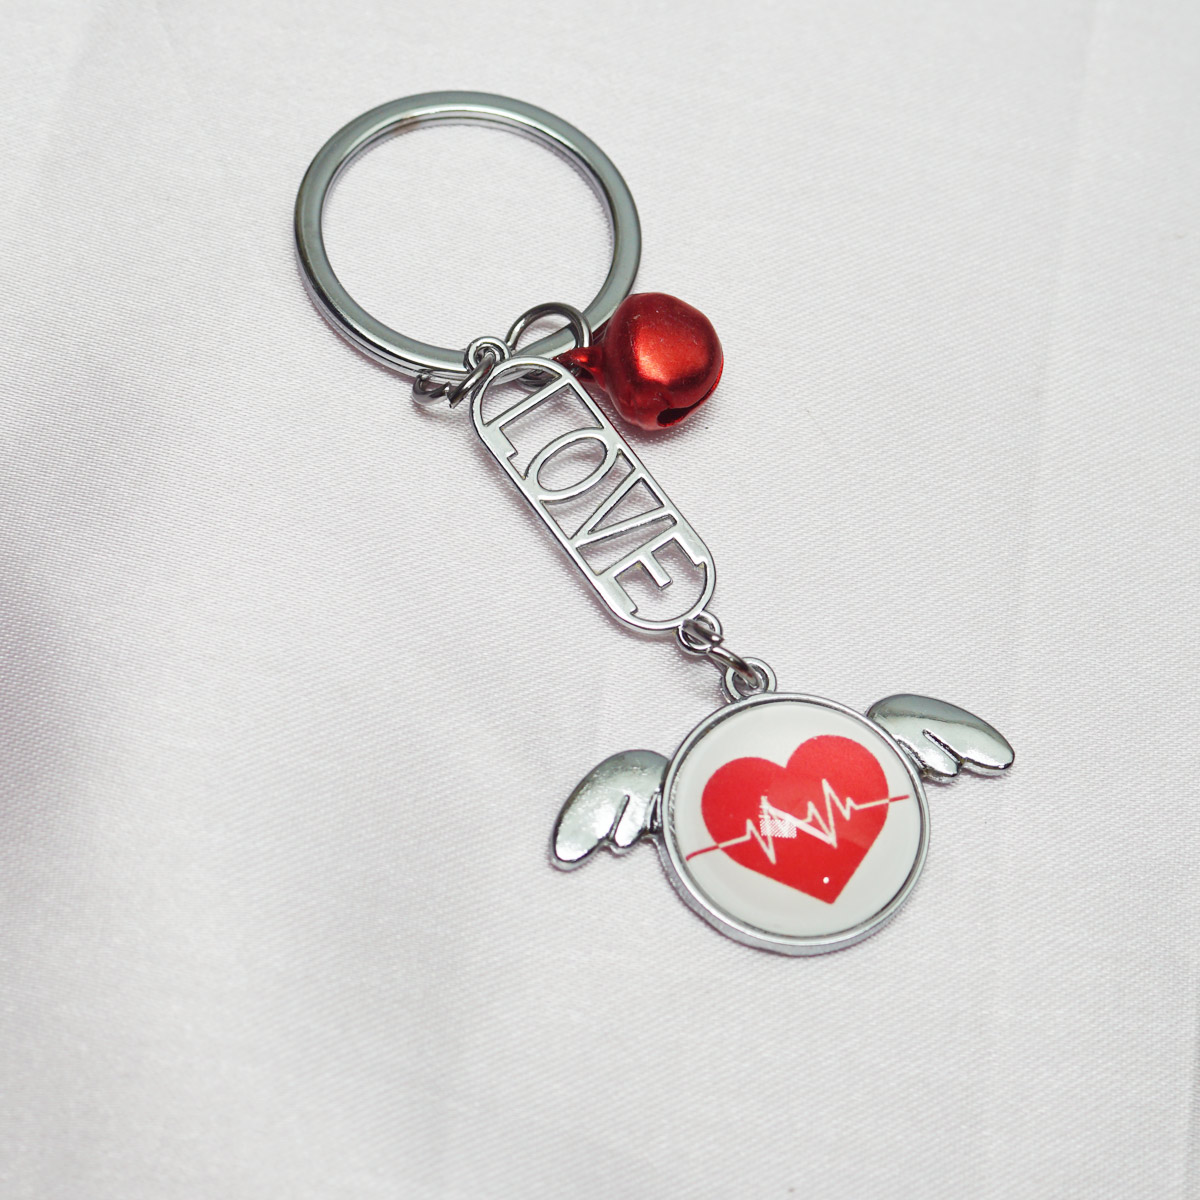 penhouse.in Flying Heart Pulse Design With Love Word And Bell Designed  Keychain SKU KP082